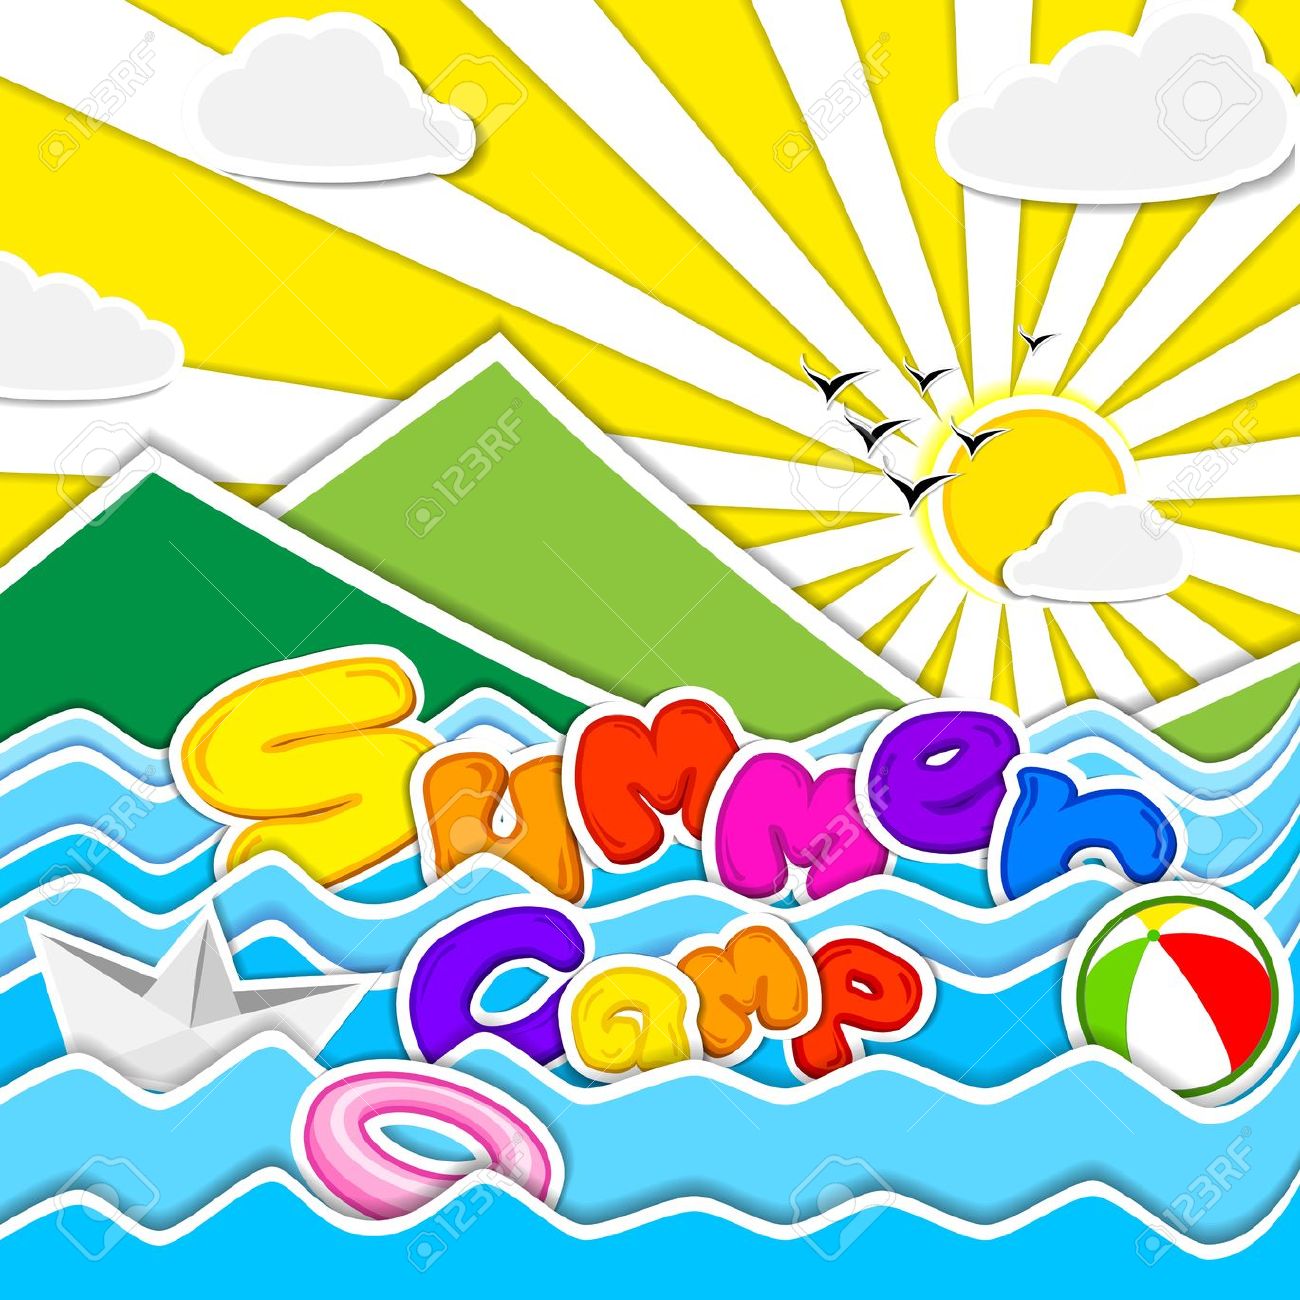 summer camp clipart images - photo #27